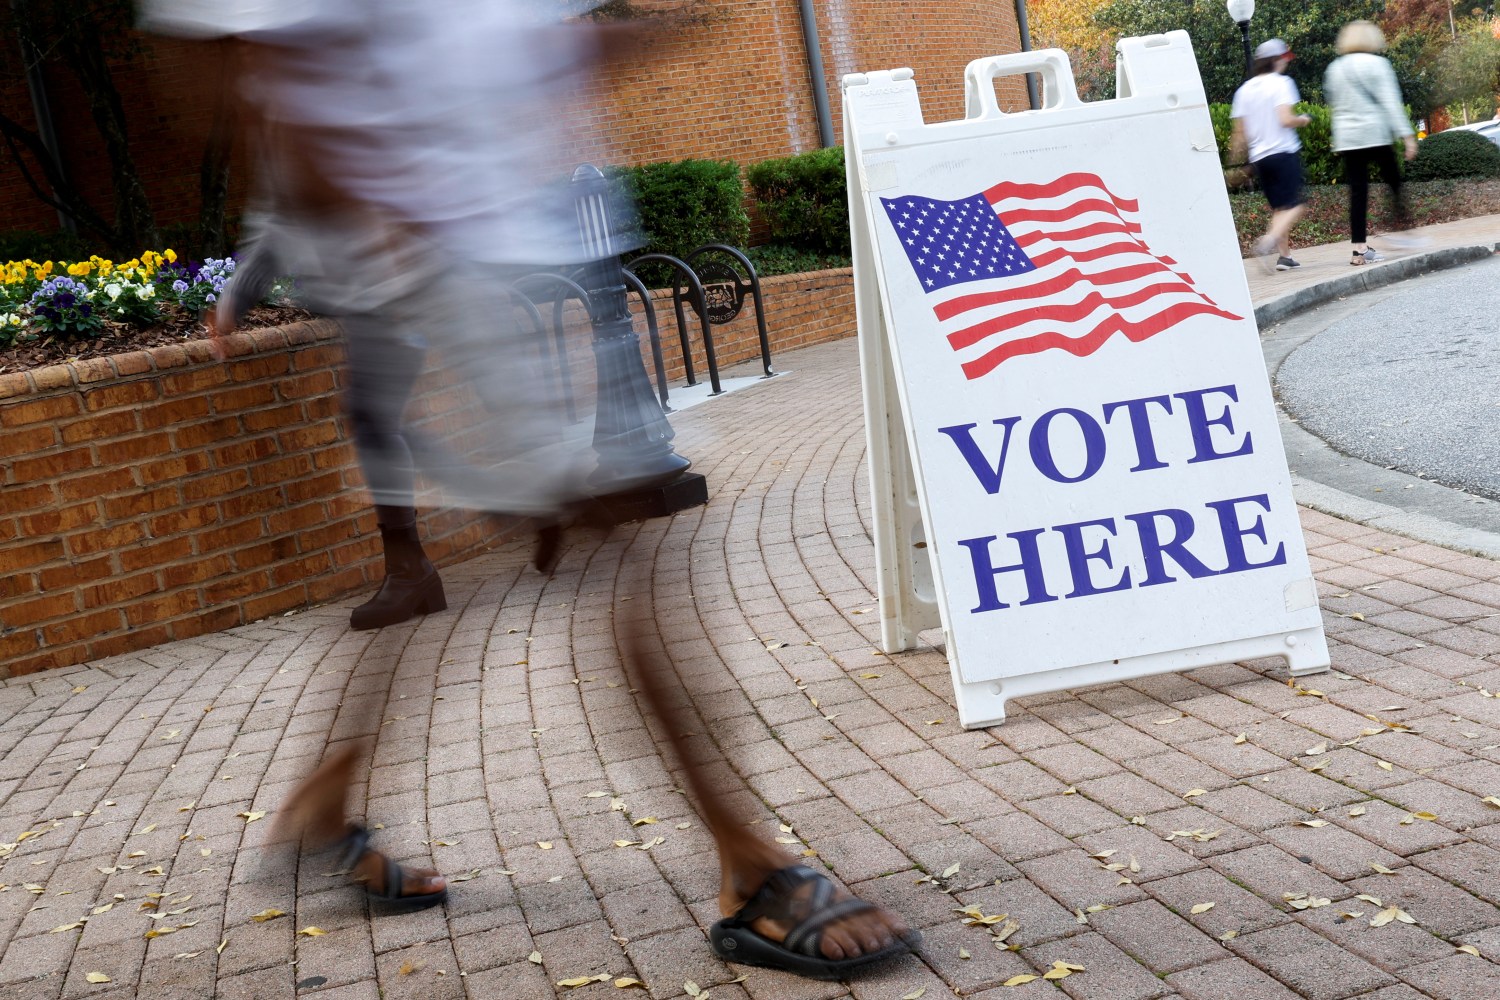 People visit an early voting location during midterm U.S. Congressional and state governor elections at the Smyrna Community Center in Smyrna, Georgia, U.S. November 3, 2022.  REUTERS/Jonathan Ernst